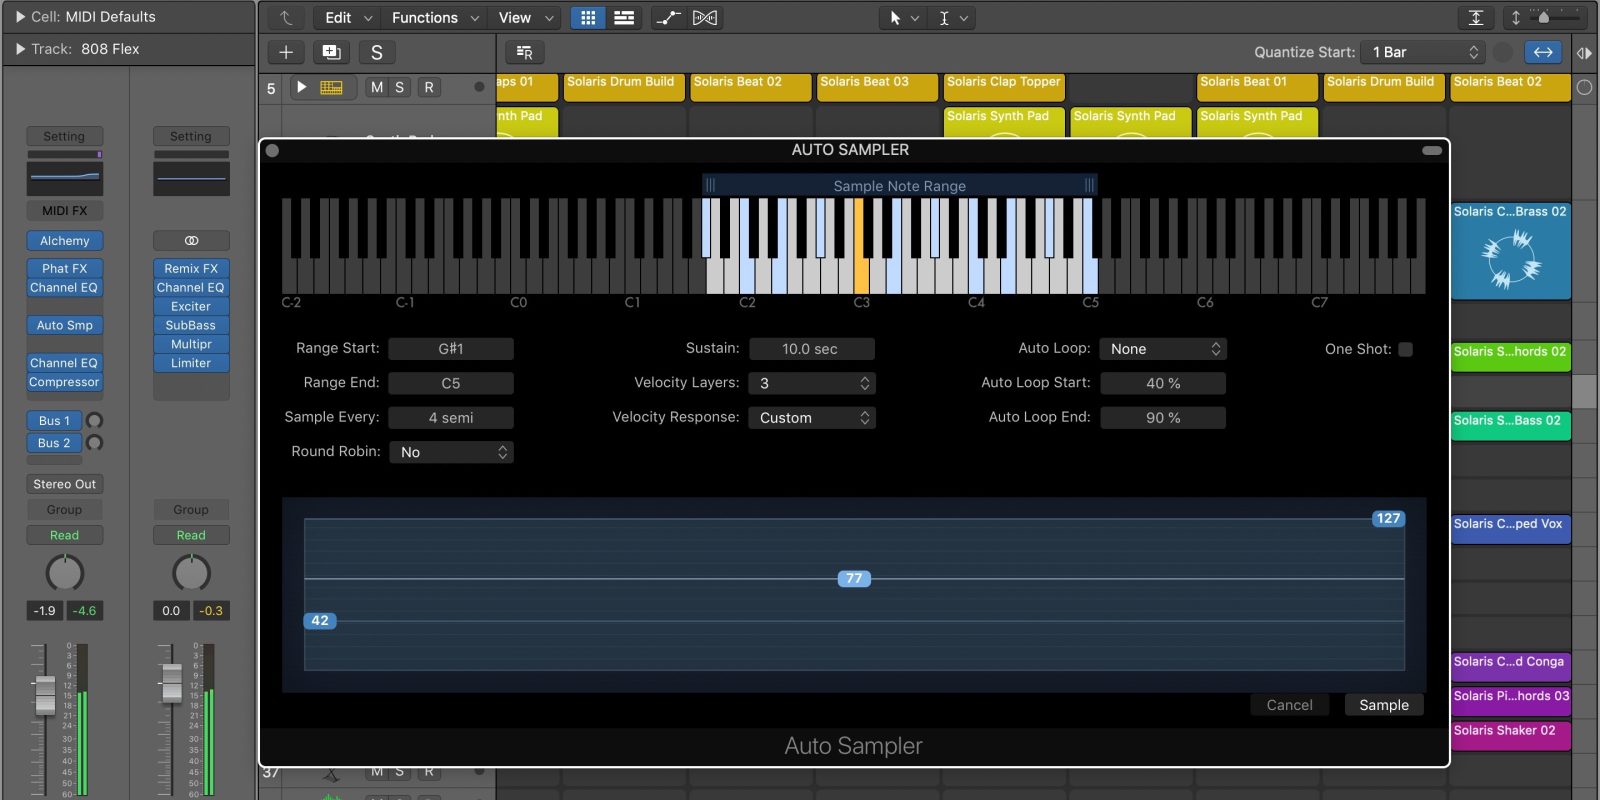 Auto Sampler - Logic Pro X 10.5: How-to, getting started guide - 9to5Mac